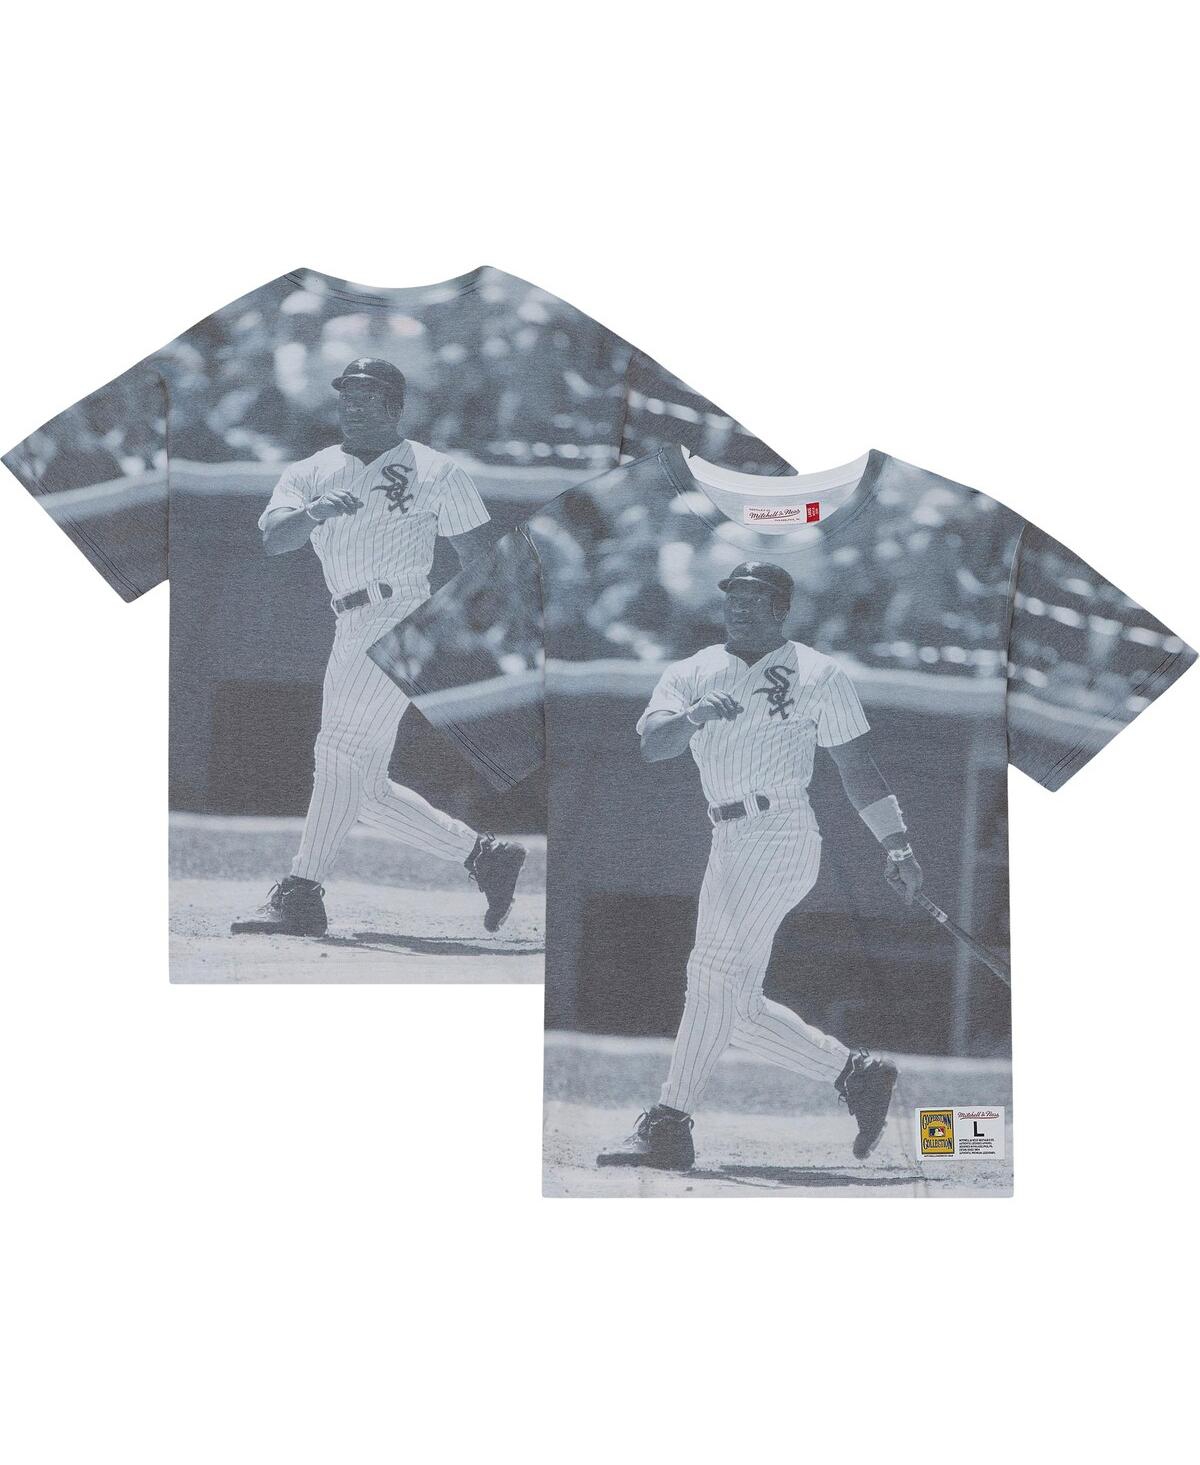 Shop Mitchell & Ness Men's  Bo Jackson Chicago White Sox Cooperstown Collection Highlight Sublimated Playe